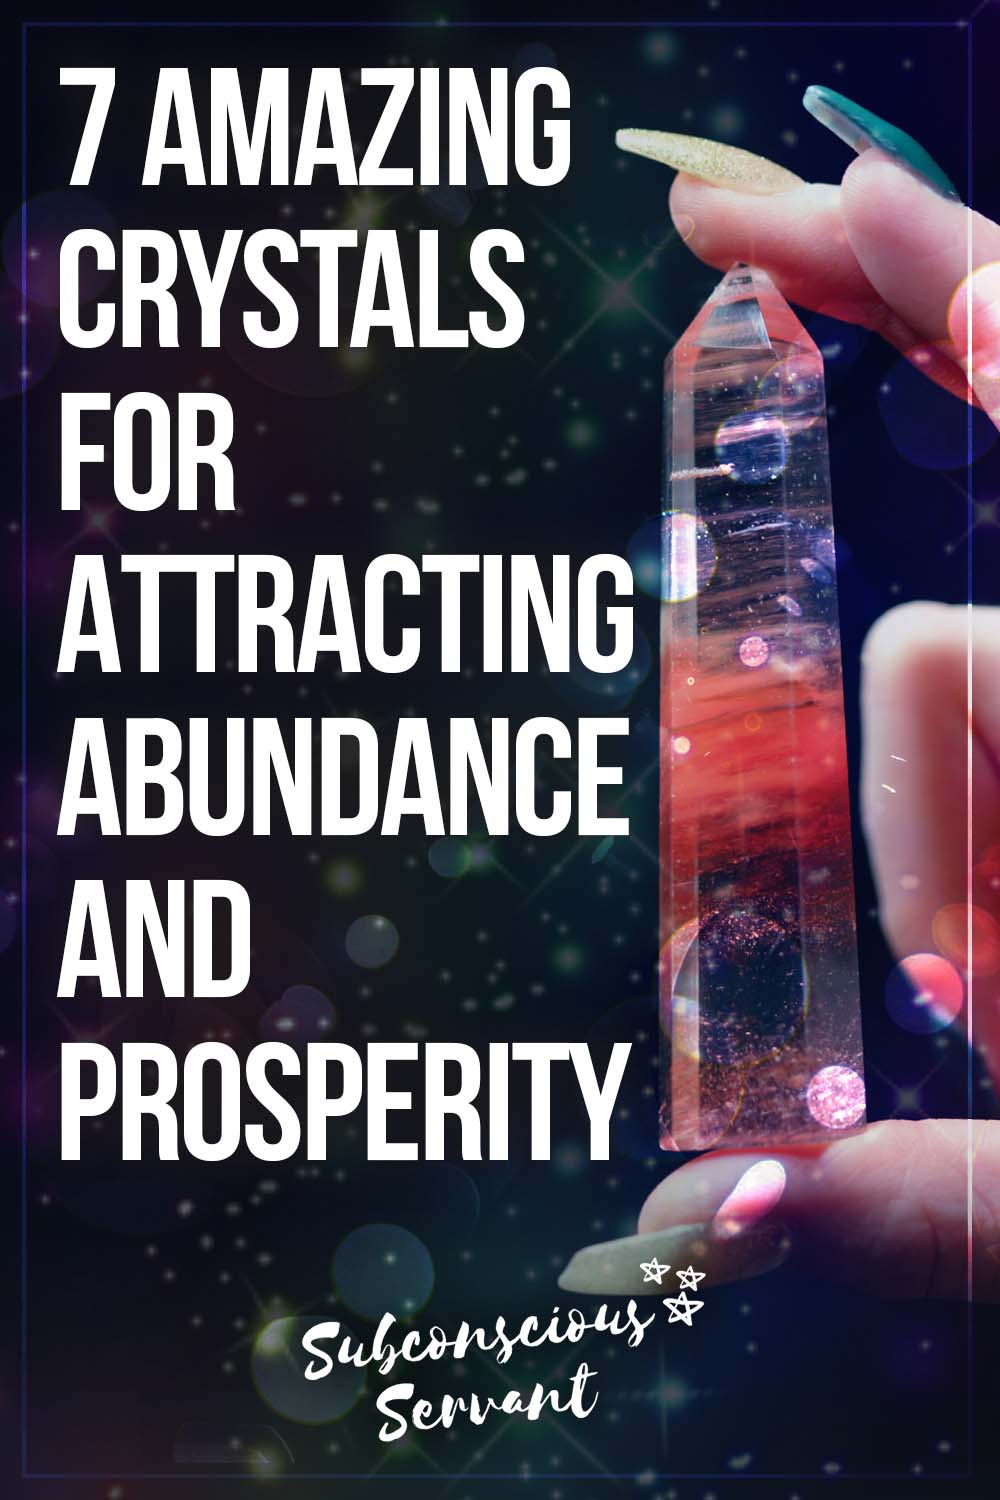 7 Amazing Crystals for Abundance and Prosperity